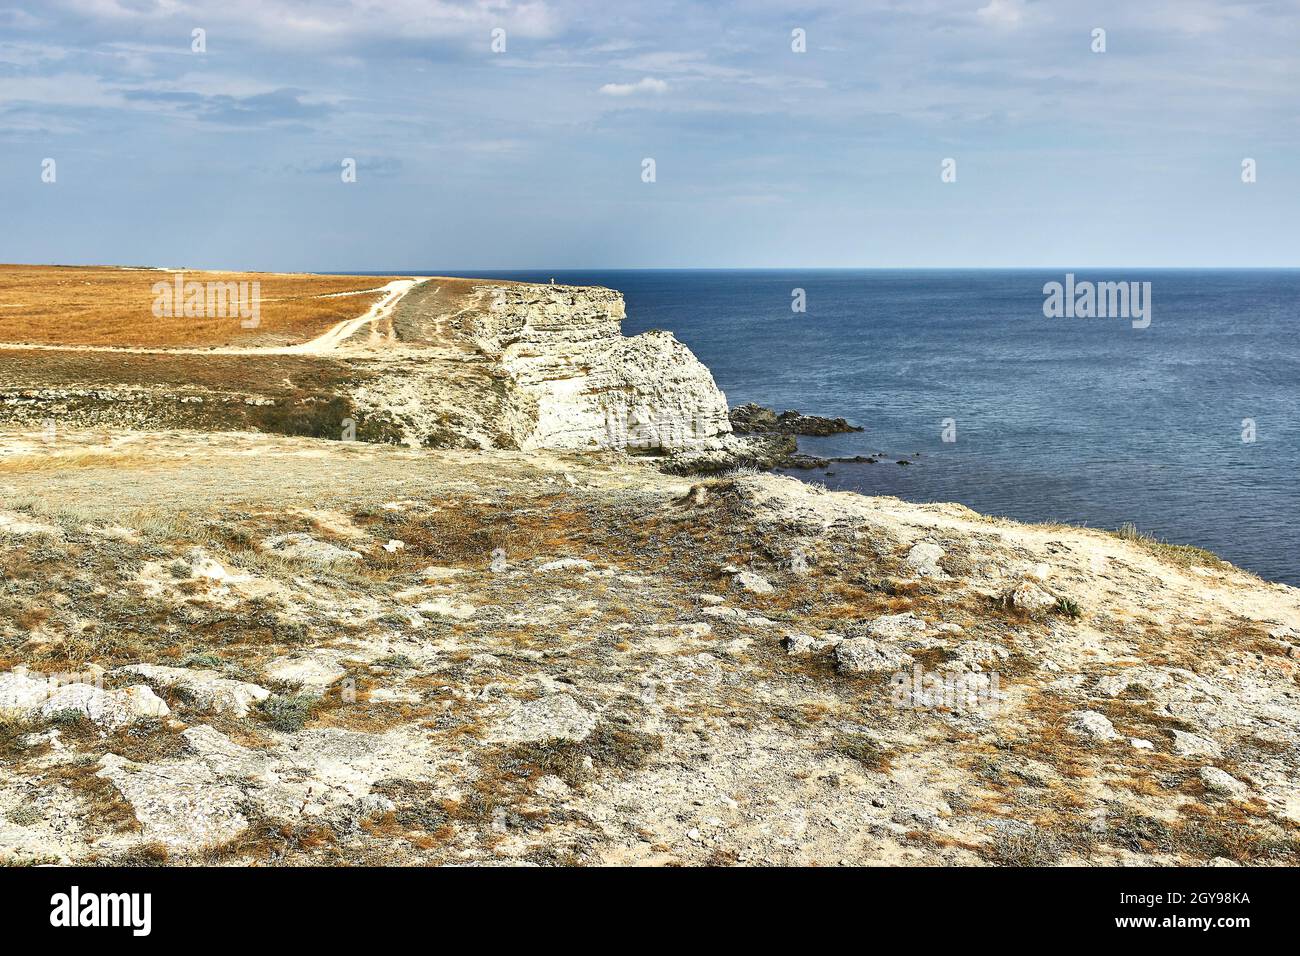 A country road along the edge of the cliff. Orange land, a cape by the sea. Seascape, horizon, calm blue sea, sky with advancing clouds. Chalk rocks. Stock Photo